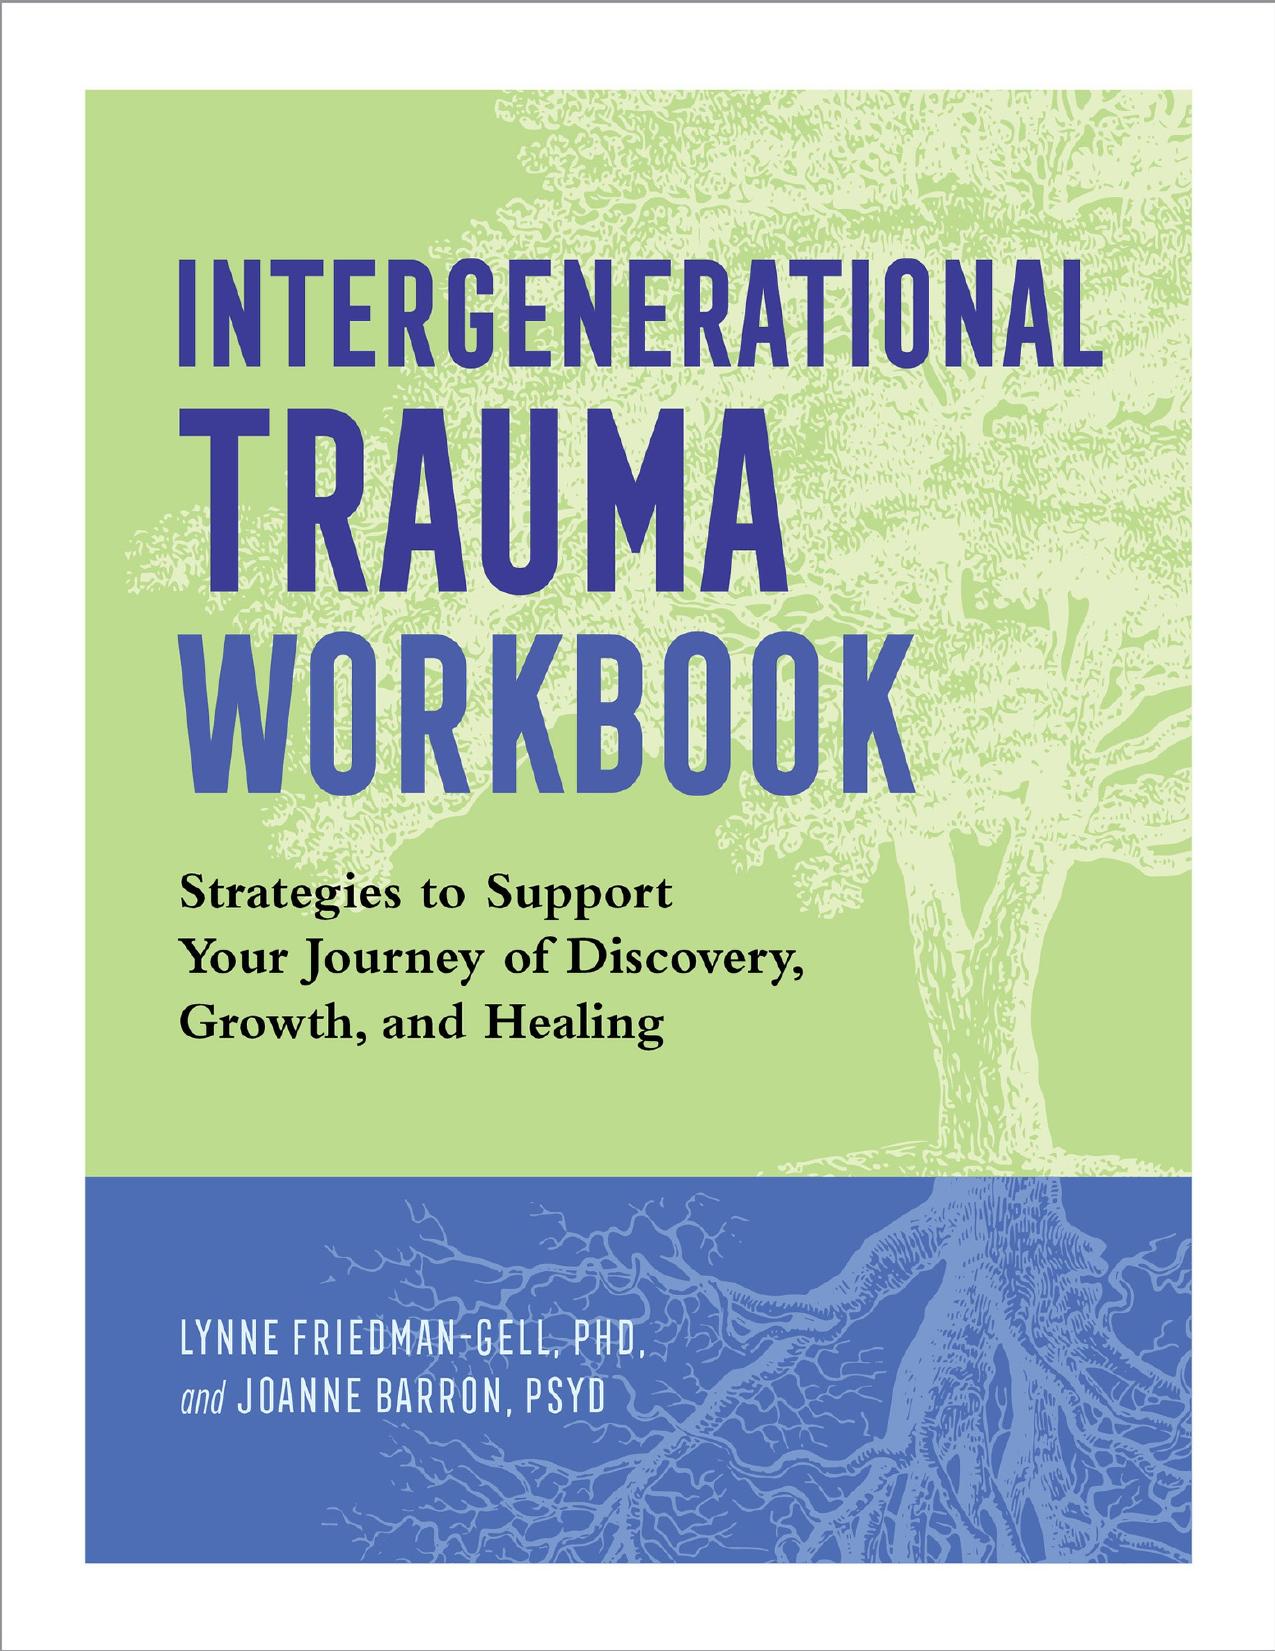 Intergenerational Trauma Workbook: Strategies to Support Your Journey of Discovery, Growth, and Healing by Barron PsyD Joanne & Friedman-Gell PhD Lynne